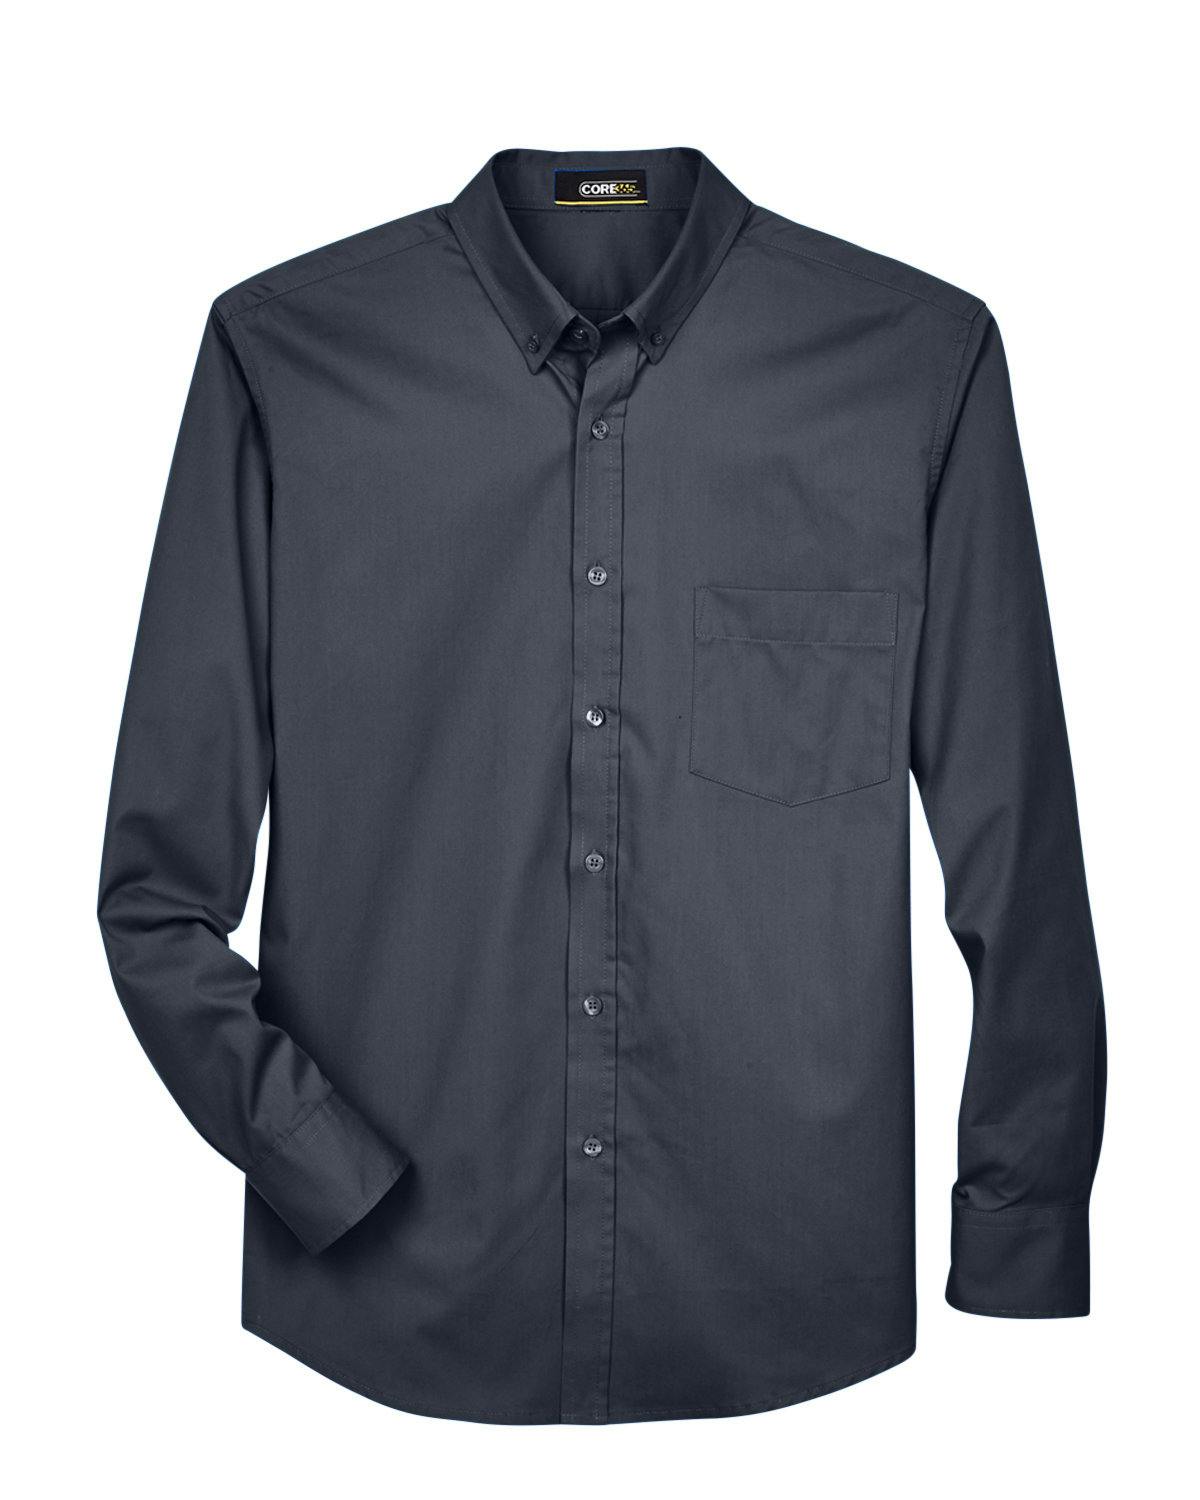 Image for Men's Operate Long-Sleeve Twill Shirt